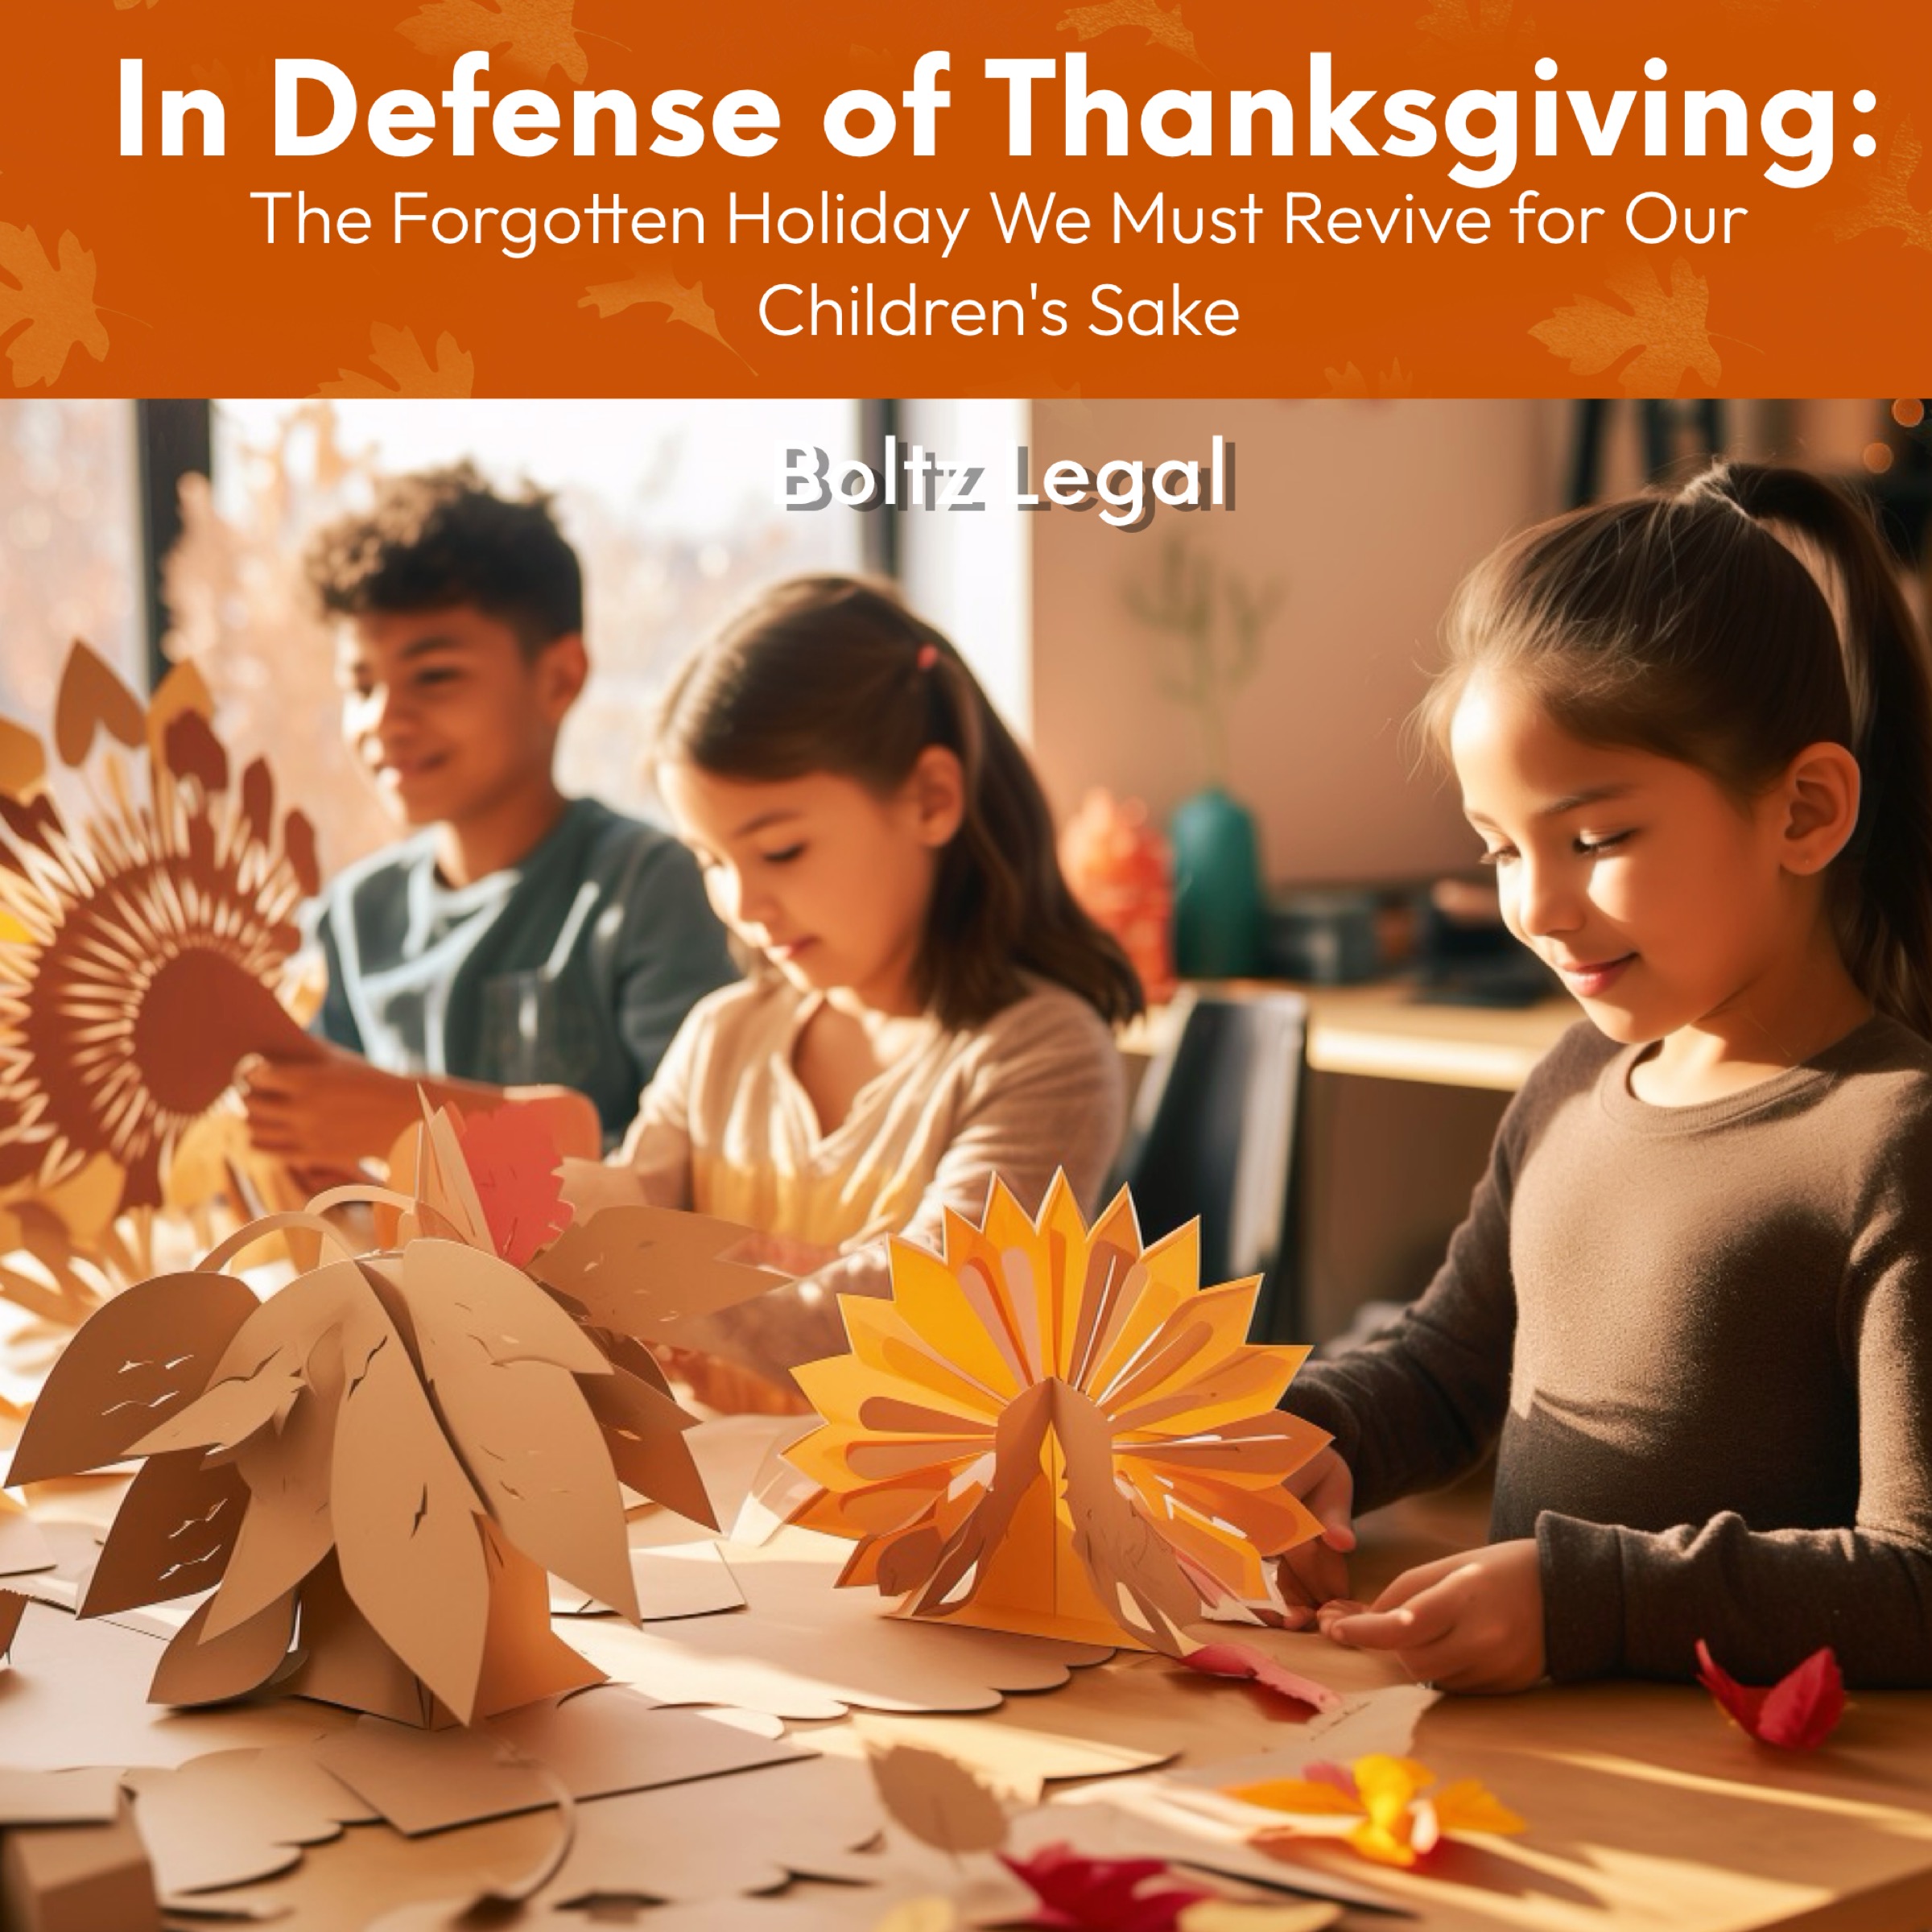 In Defense of Thanksgiving The Forgotten Holiday We Must Revive for Our Children's Sake